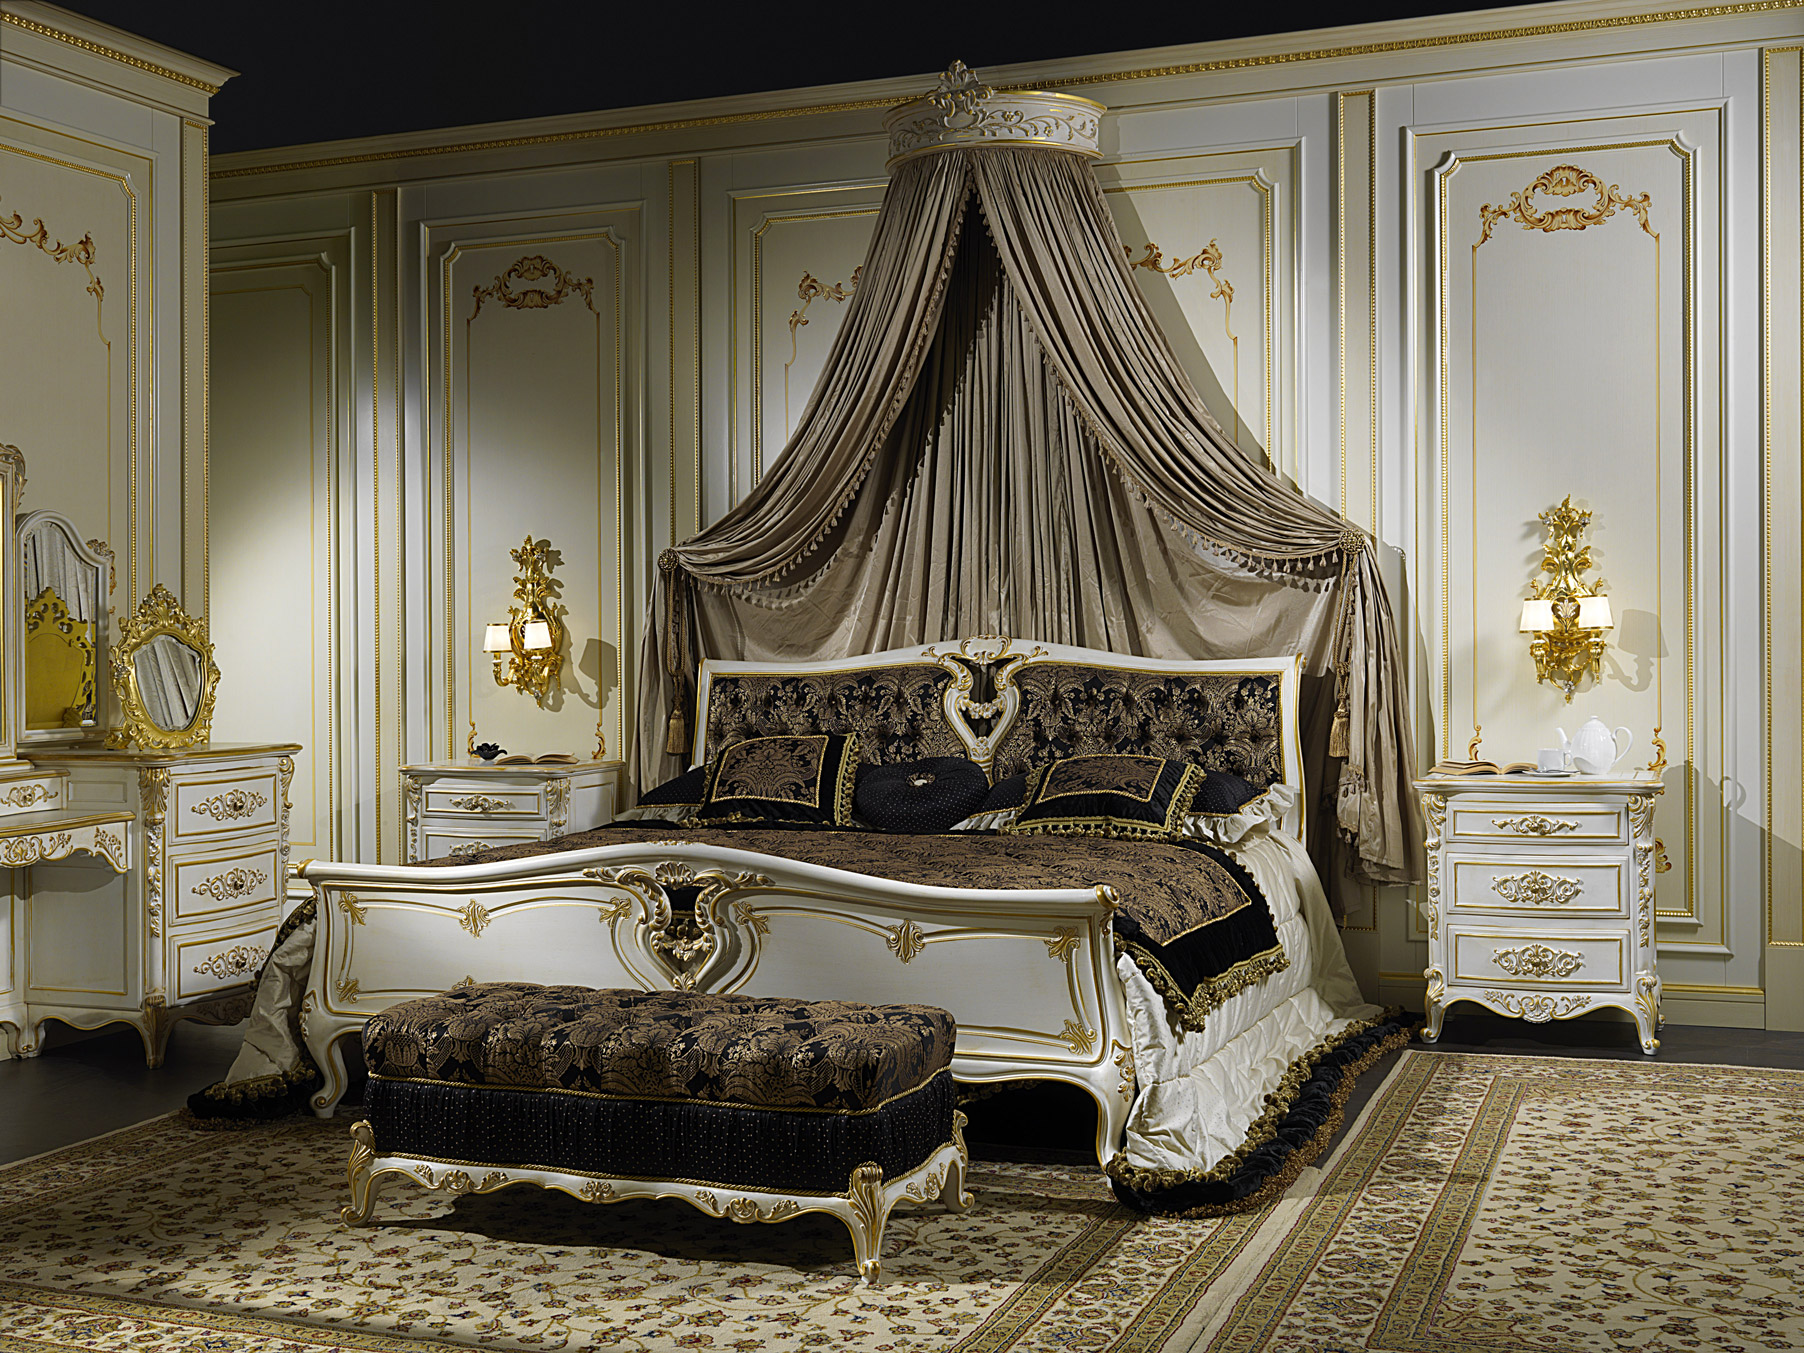 Latest trends in luxury furniture